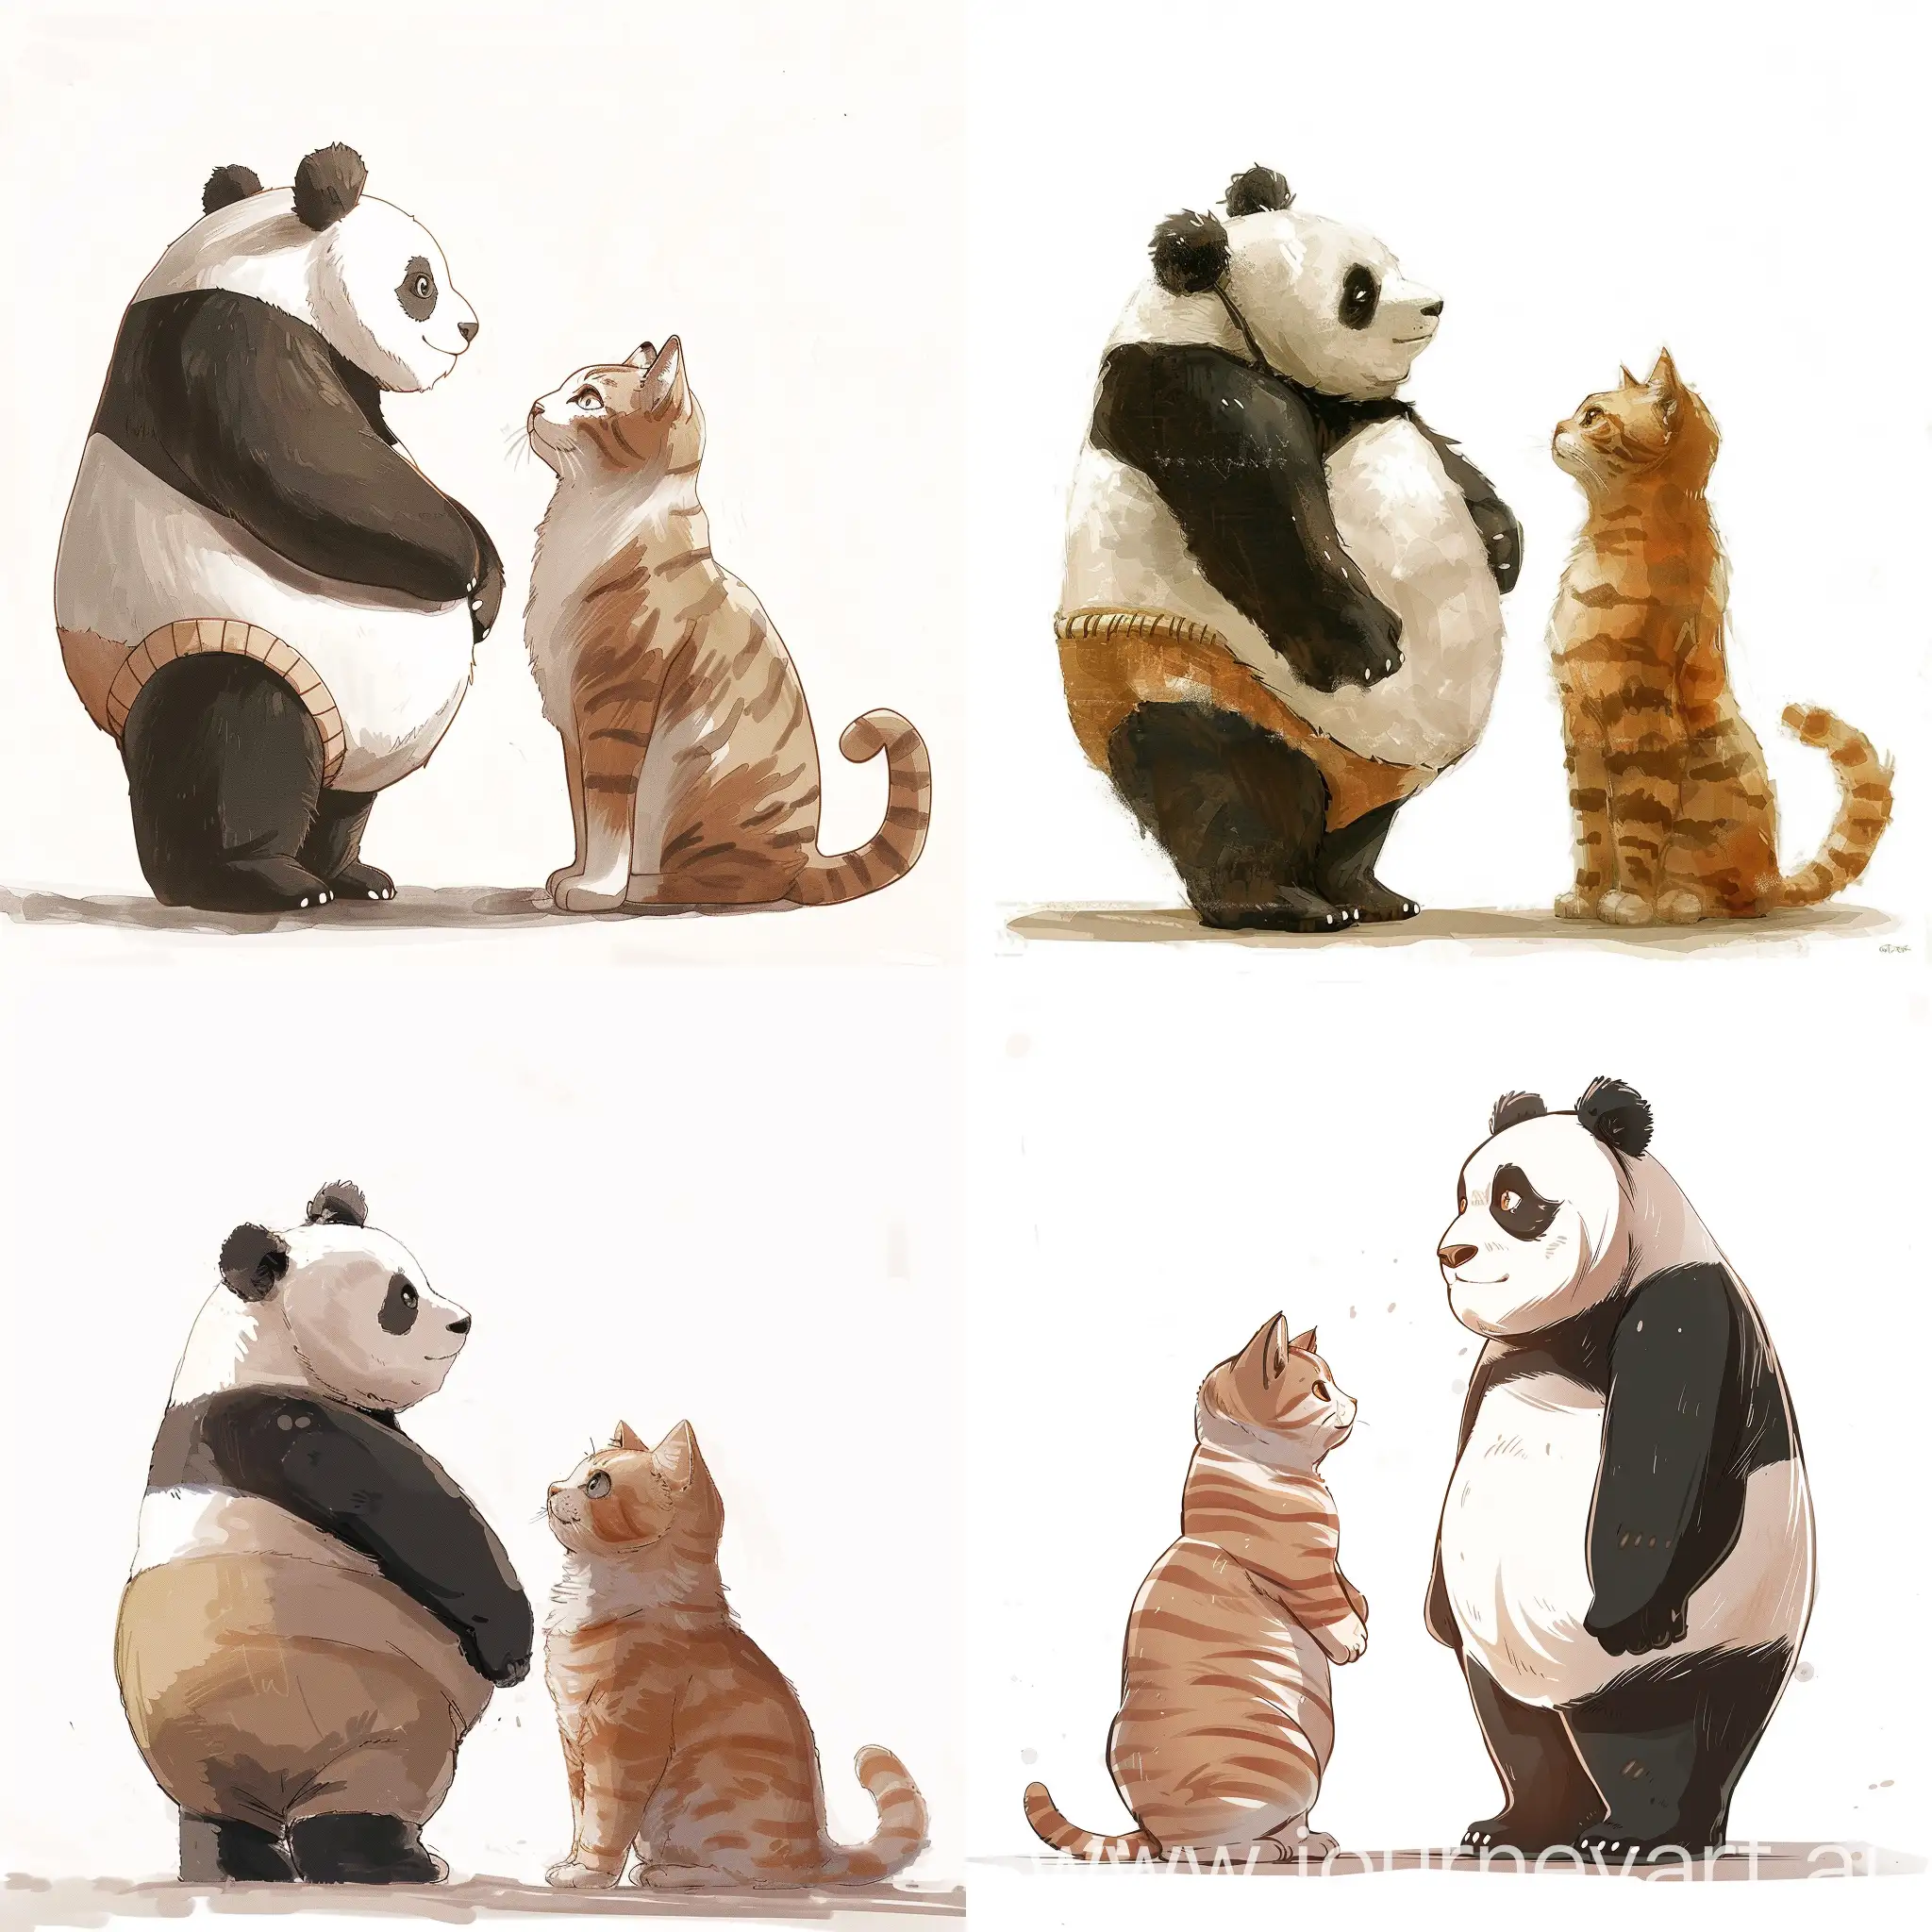 Chubby-Anime-Panda-and-Cat-Standing-Together-on-White-Background